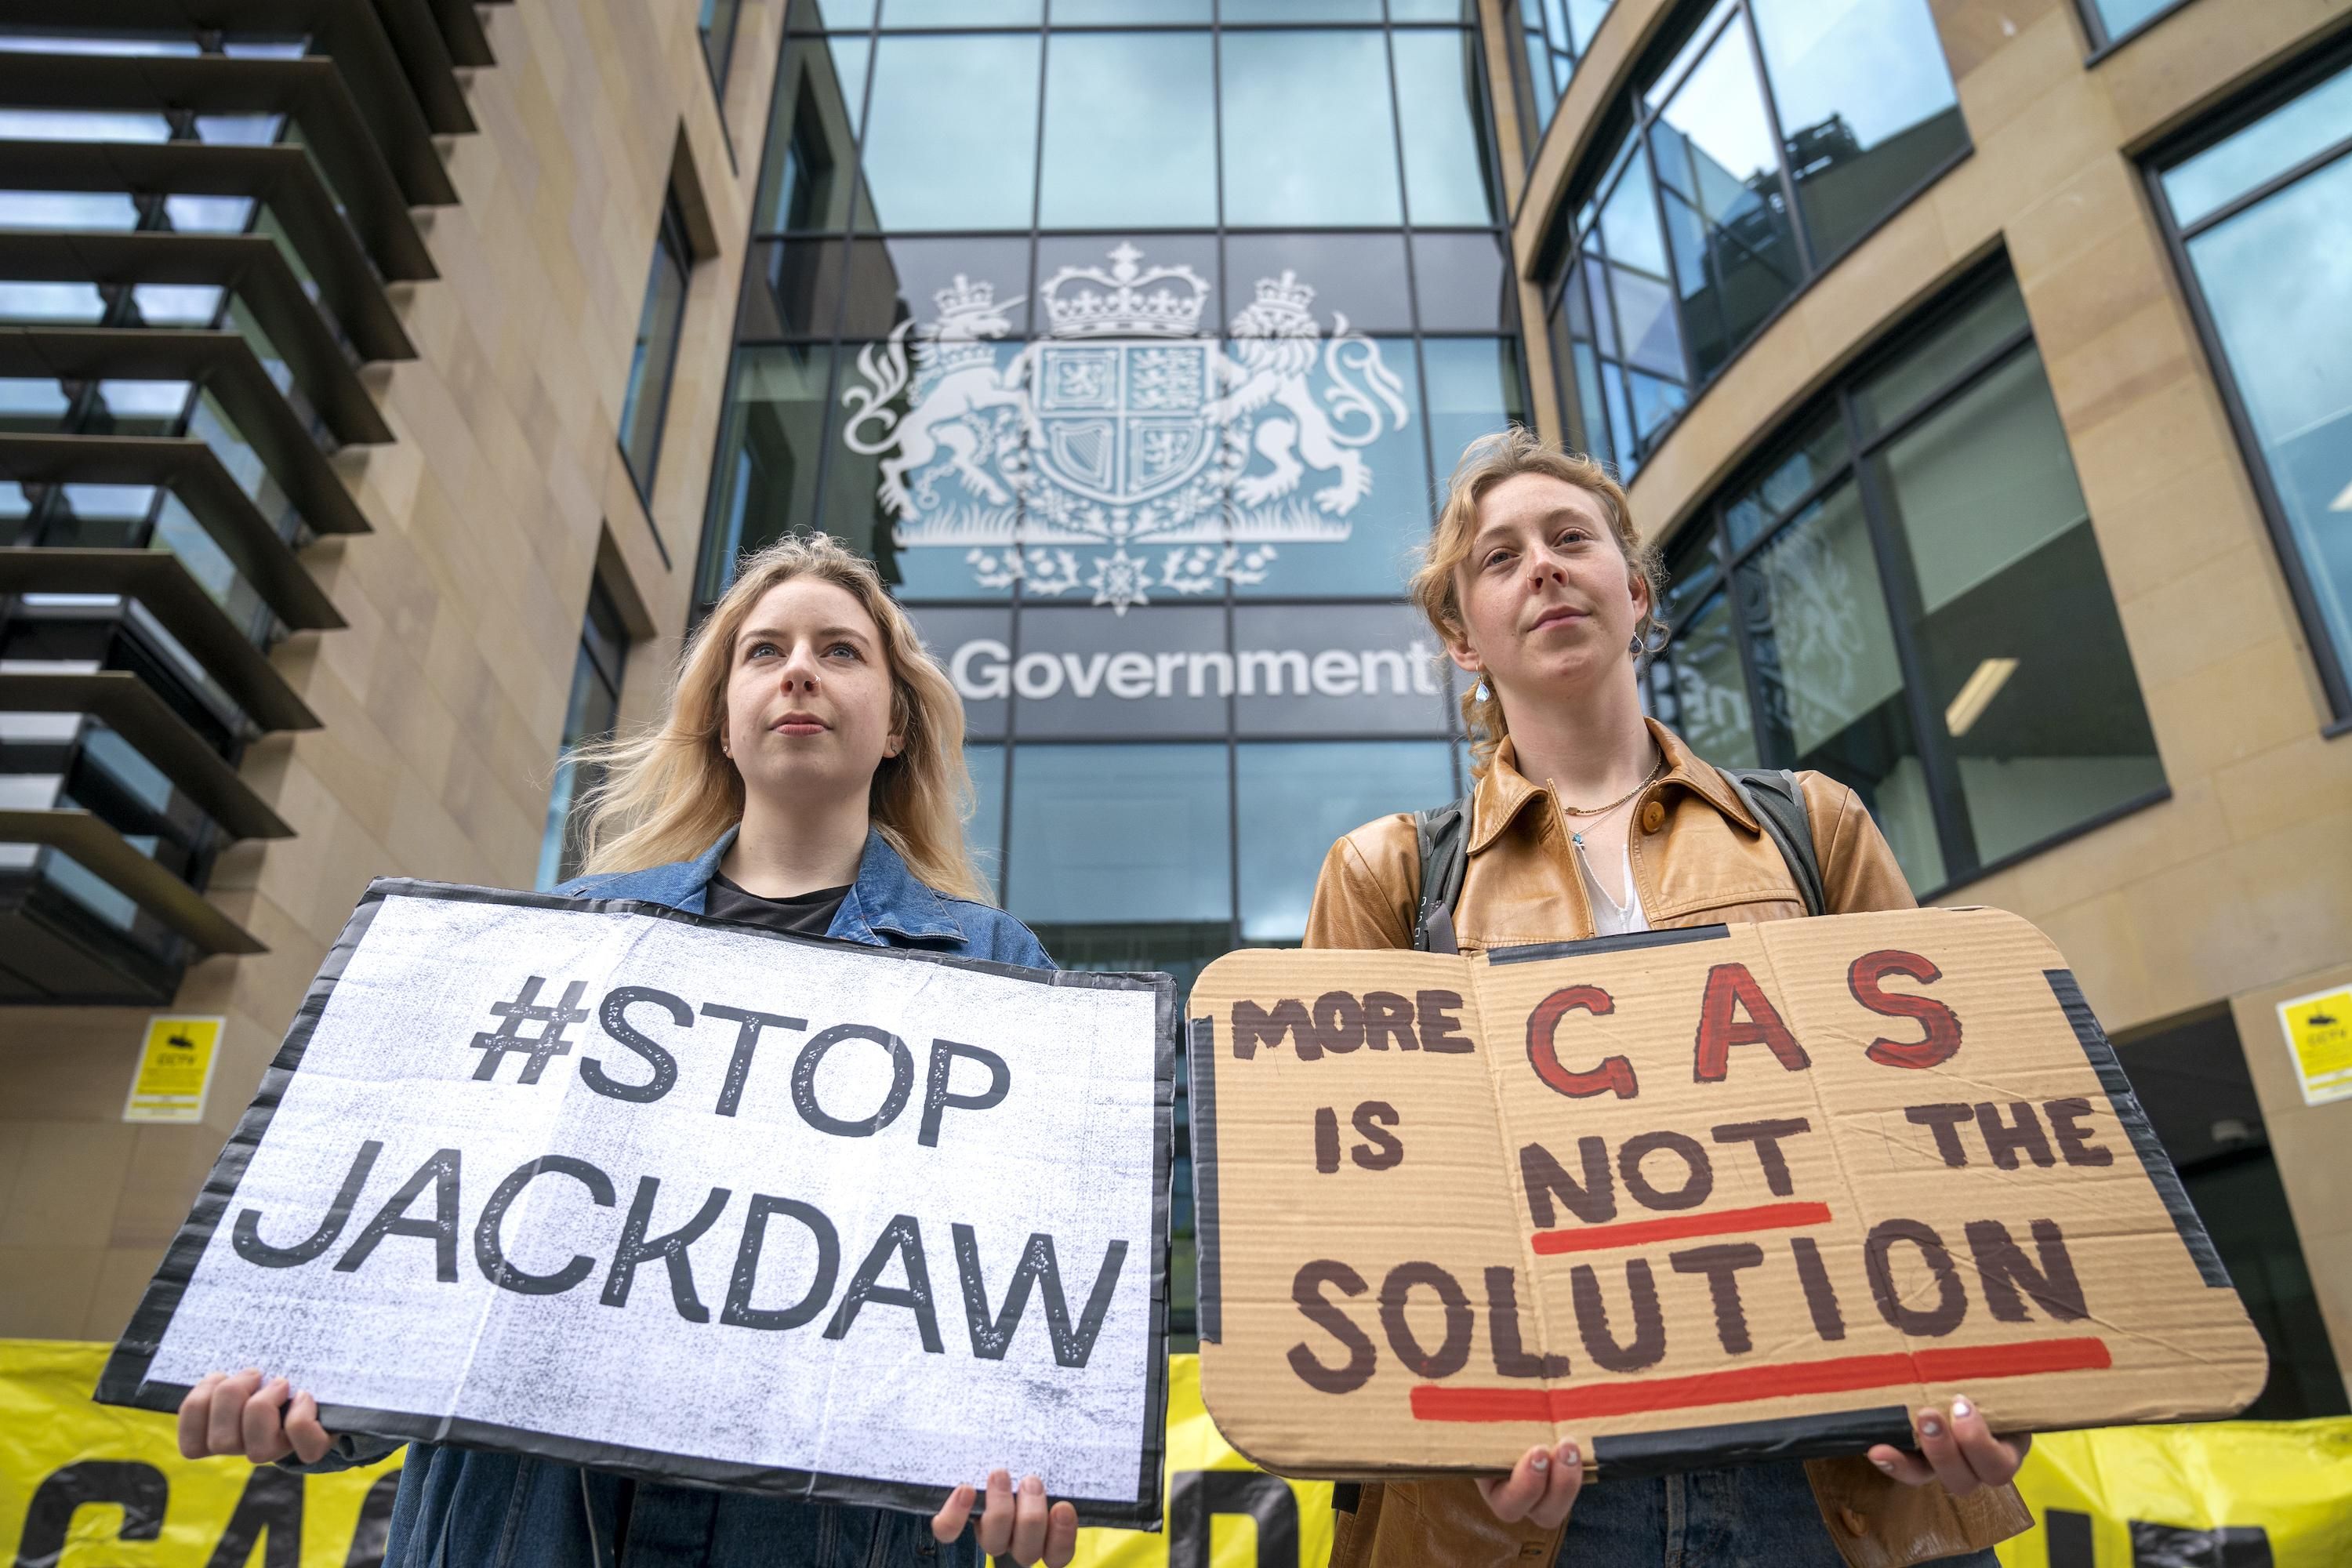 Environmental campaigners from Friends of the Earth protest outside the U.K. government building in Edinburgh to demand the U.K. government reverse its decision to approve Shell's Jackdaw gas field in the North Sea and instead move away from fossil fuels, on June 2, 2022. (Photo: Jane Barlow/PA Images via Getty Images)